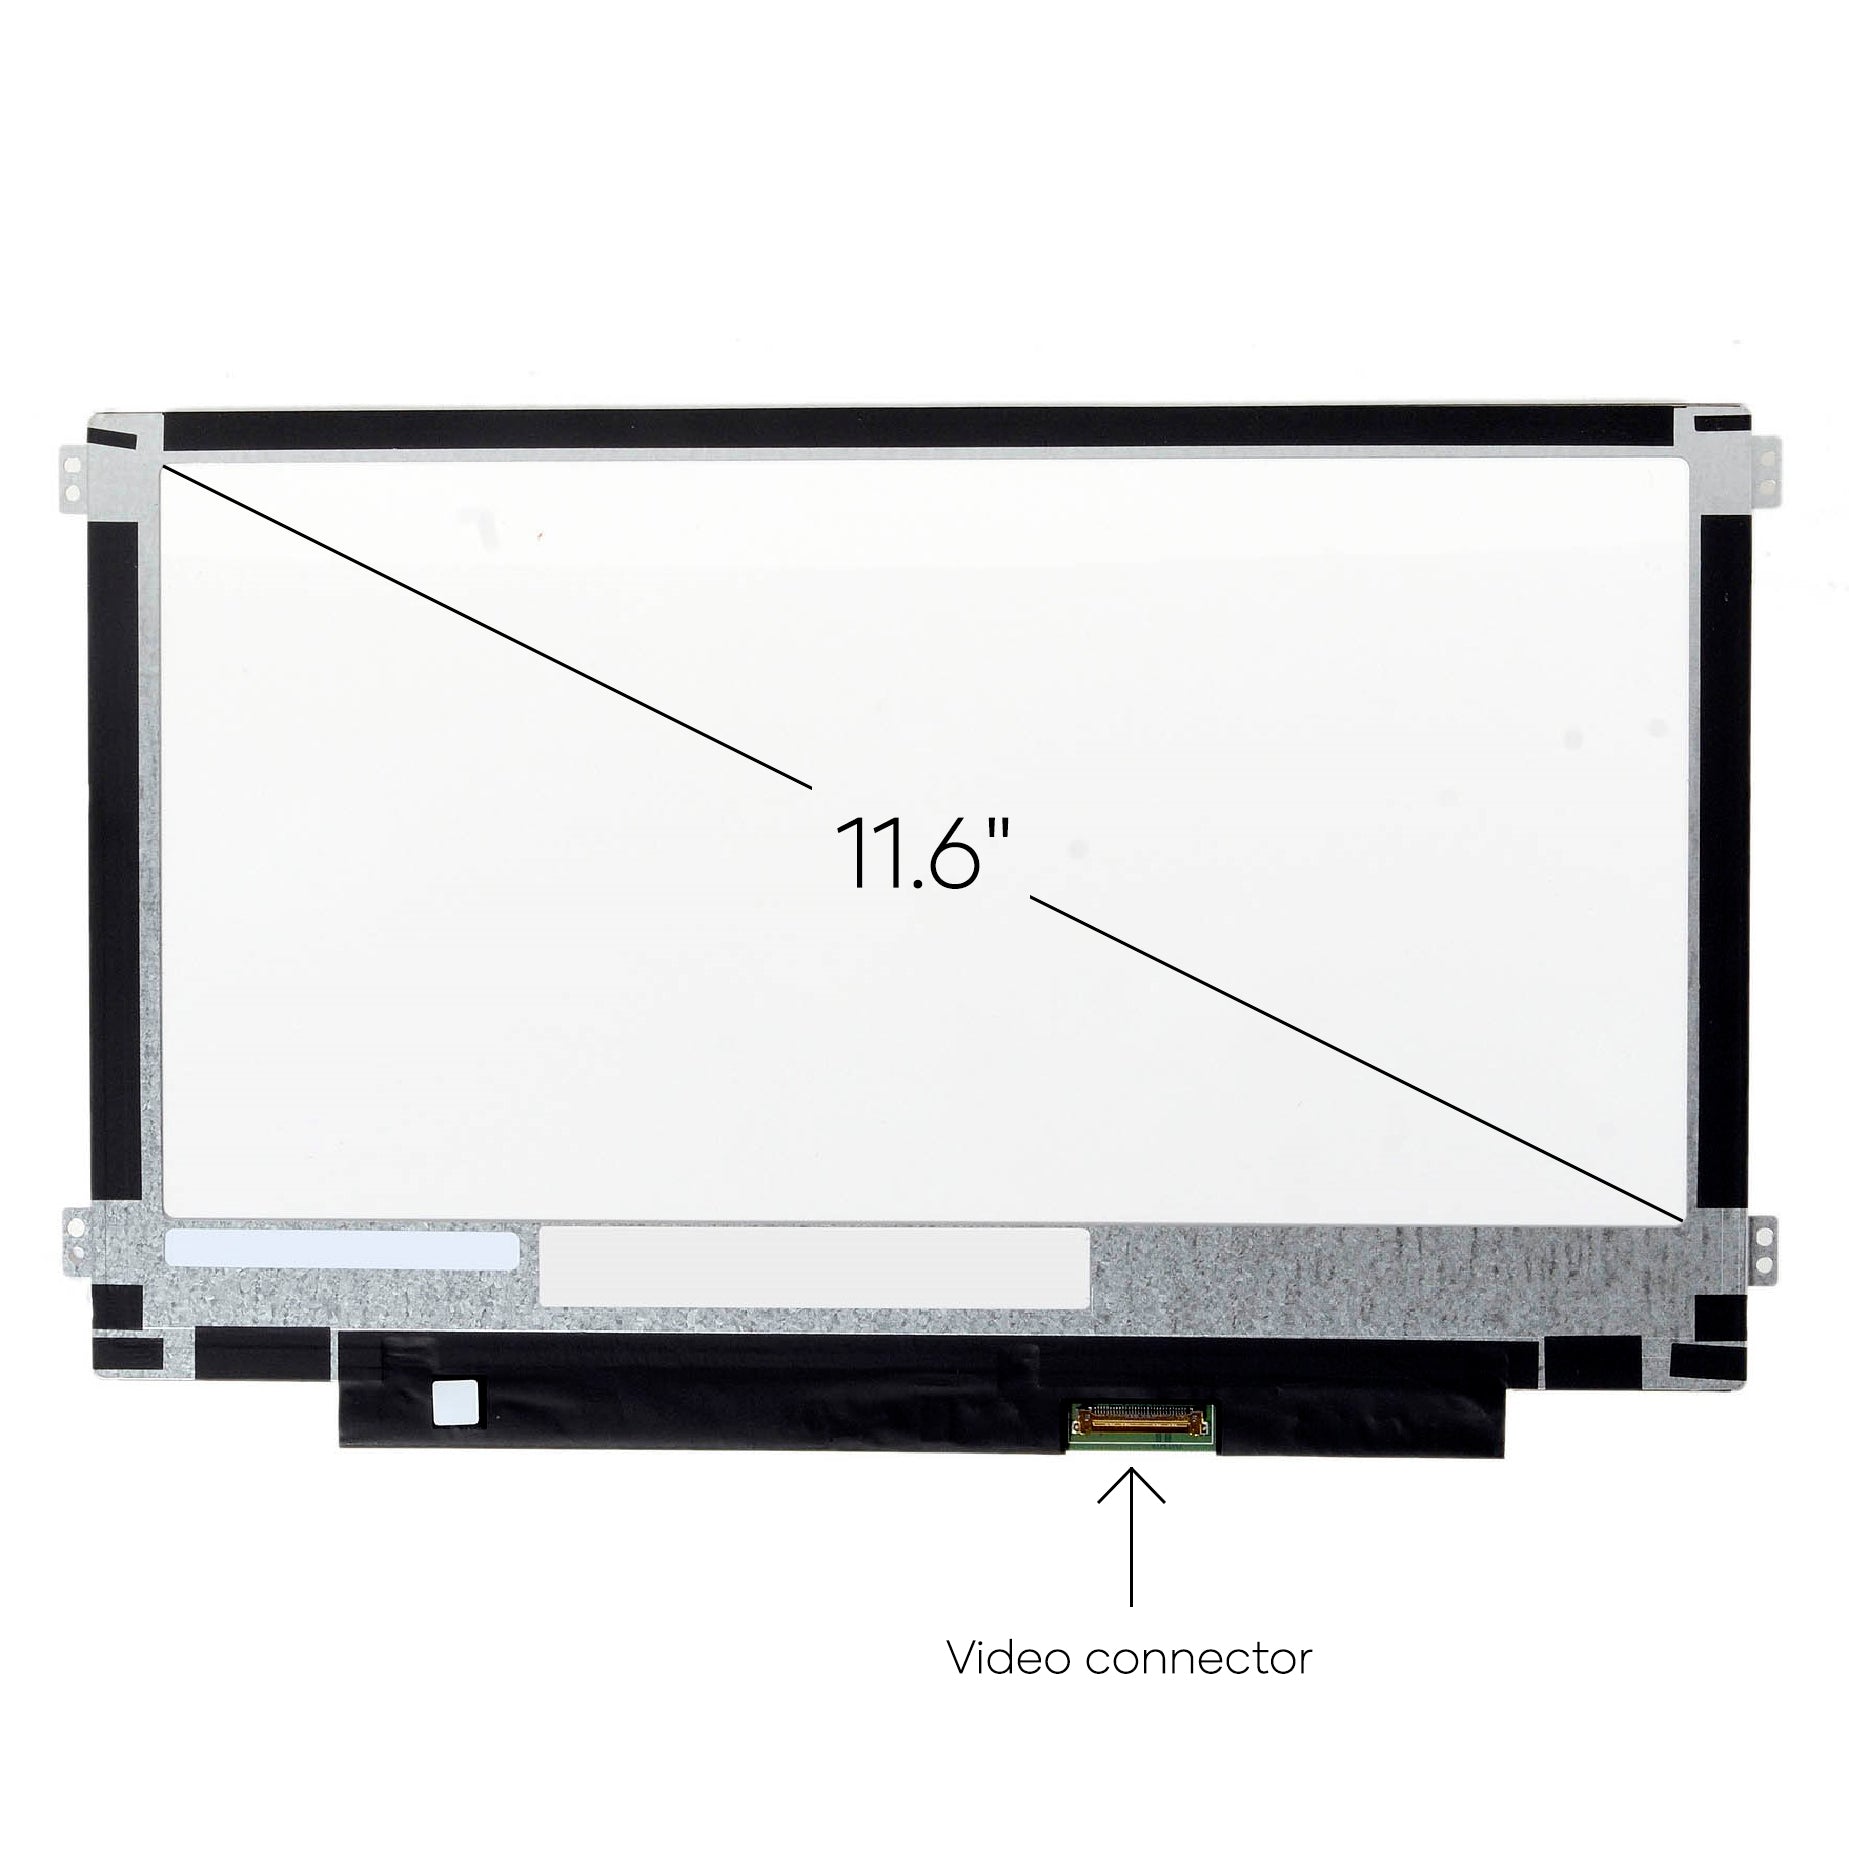 Screen Replacement for Lenovo Chromebook 100E 81QB0000US HD 1366x768 Matte LCD LED Display